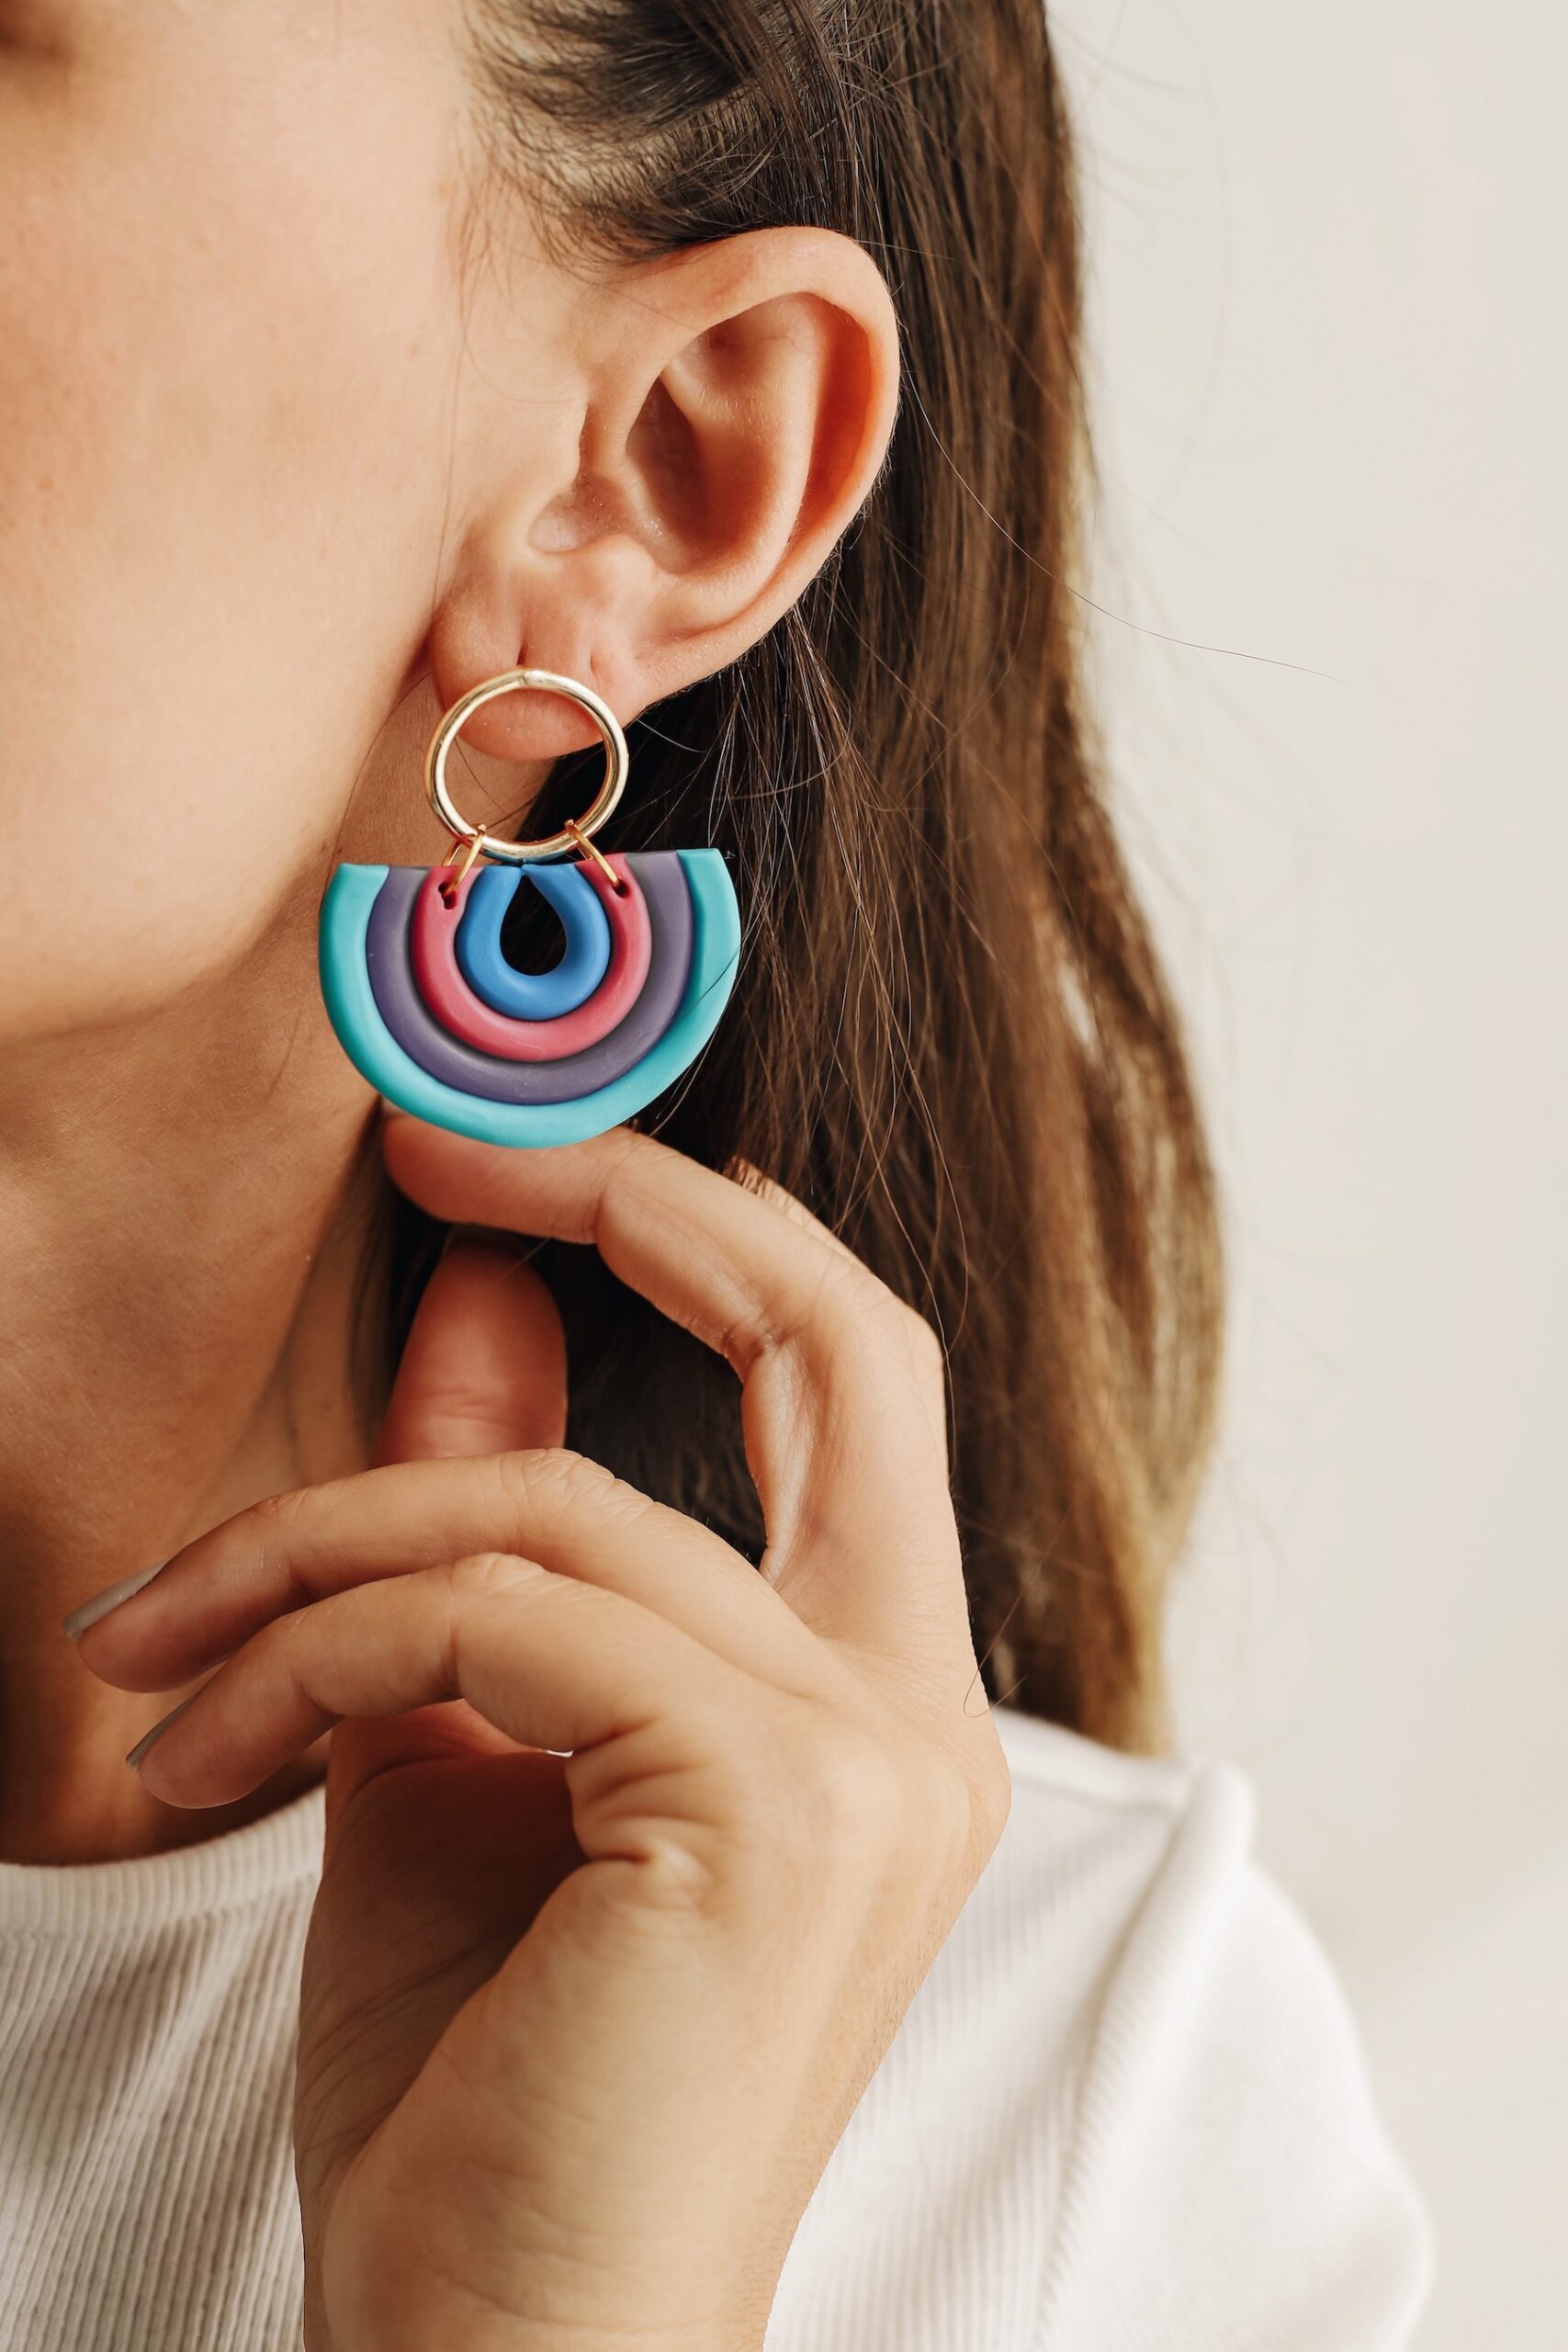 Anne is an earring was designed by a handmade woman designer. It was made of clay